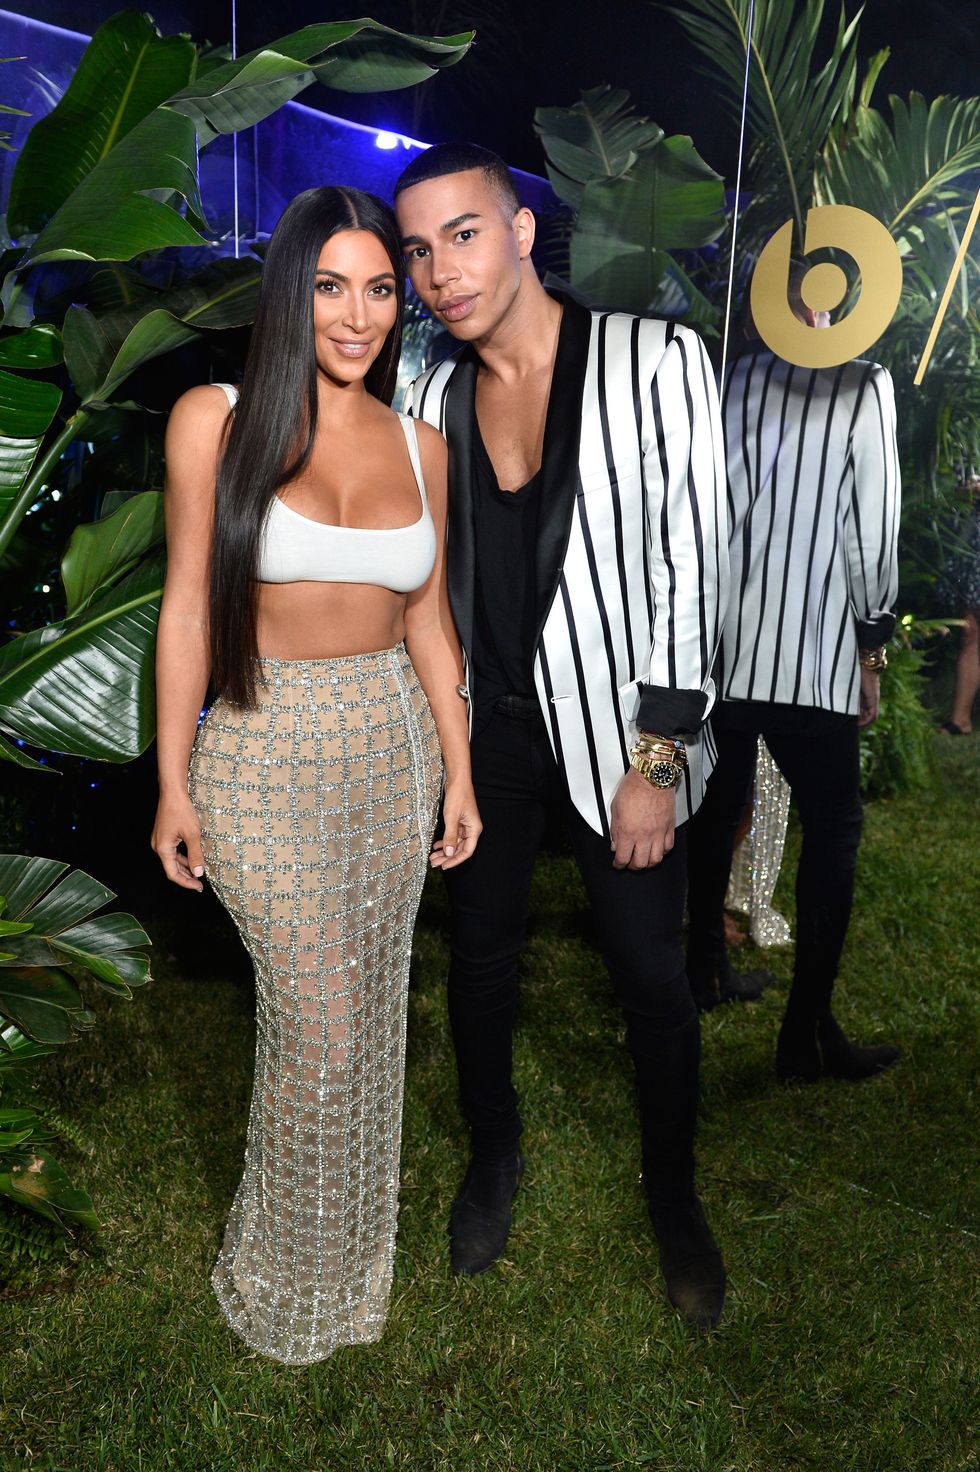 BEVERLY HILLS, CA - JULY 20:  Kim Kardashian (L) and designer Olivier Rousteing at BALMAIN celebrates first Los Angeles boutique opening and Beats by Dre collaboration on July 20, 2017 in Beverly Hills, California.  (Photo by Stefanie Keenan/Getty Images for BALMAIN)